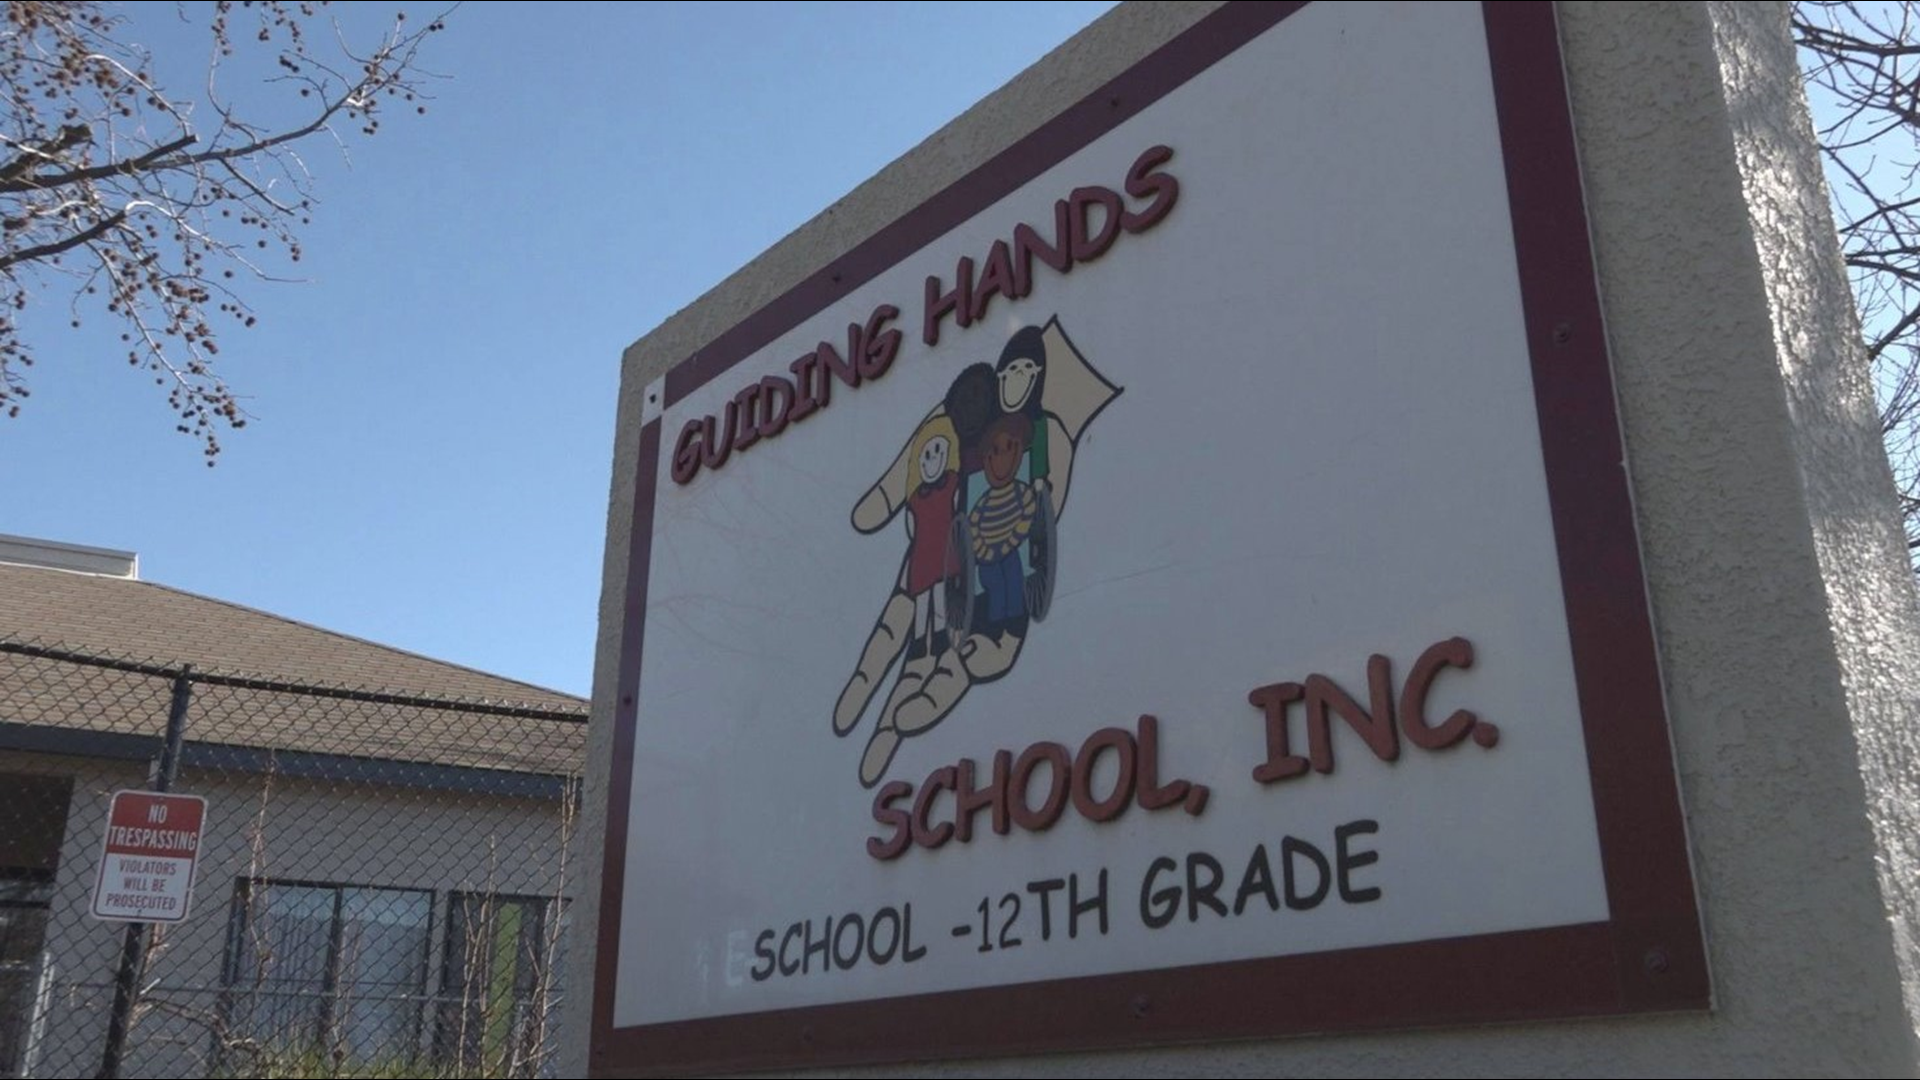 The California Board of Education has stripped Guiding Hands School of its certification after Max Benson, a 13-year-old child with autism, died after being restrained by staff.